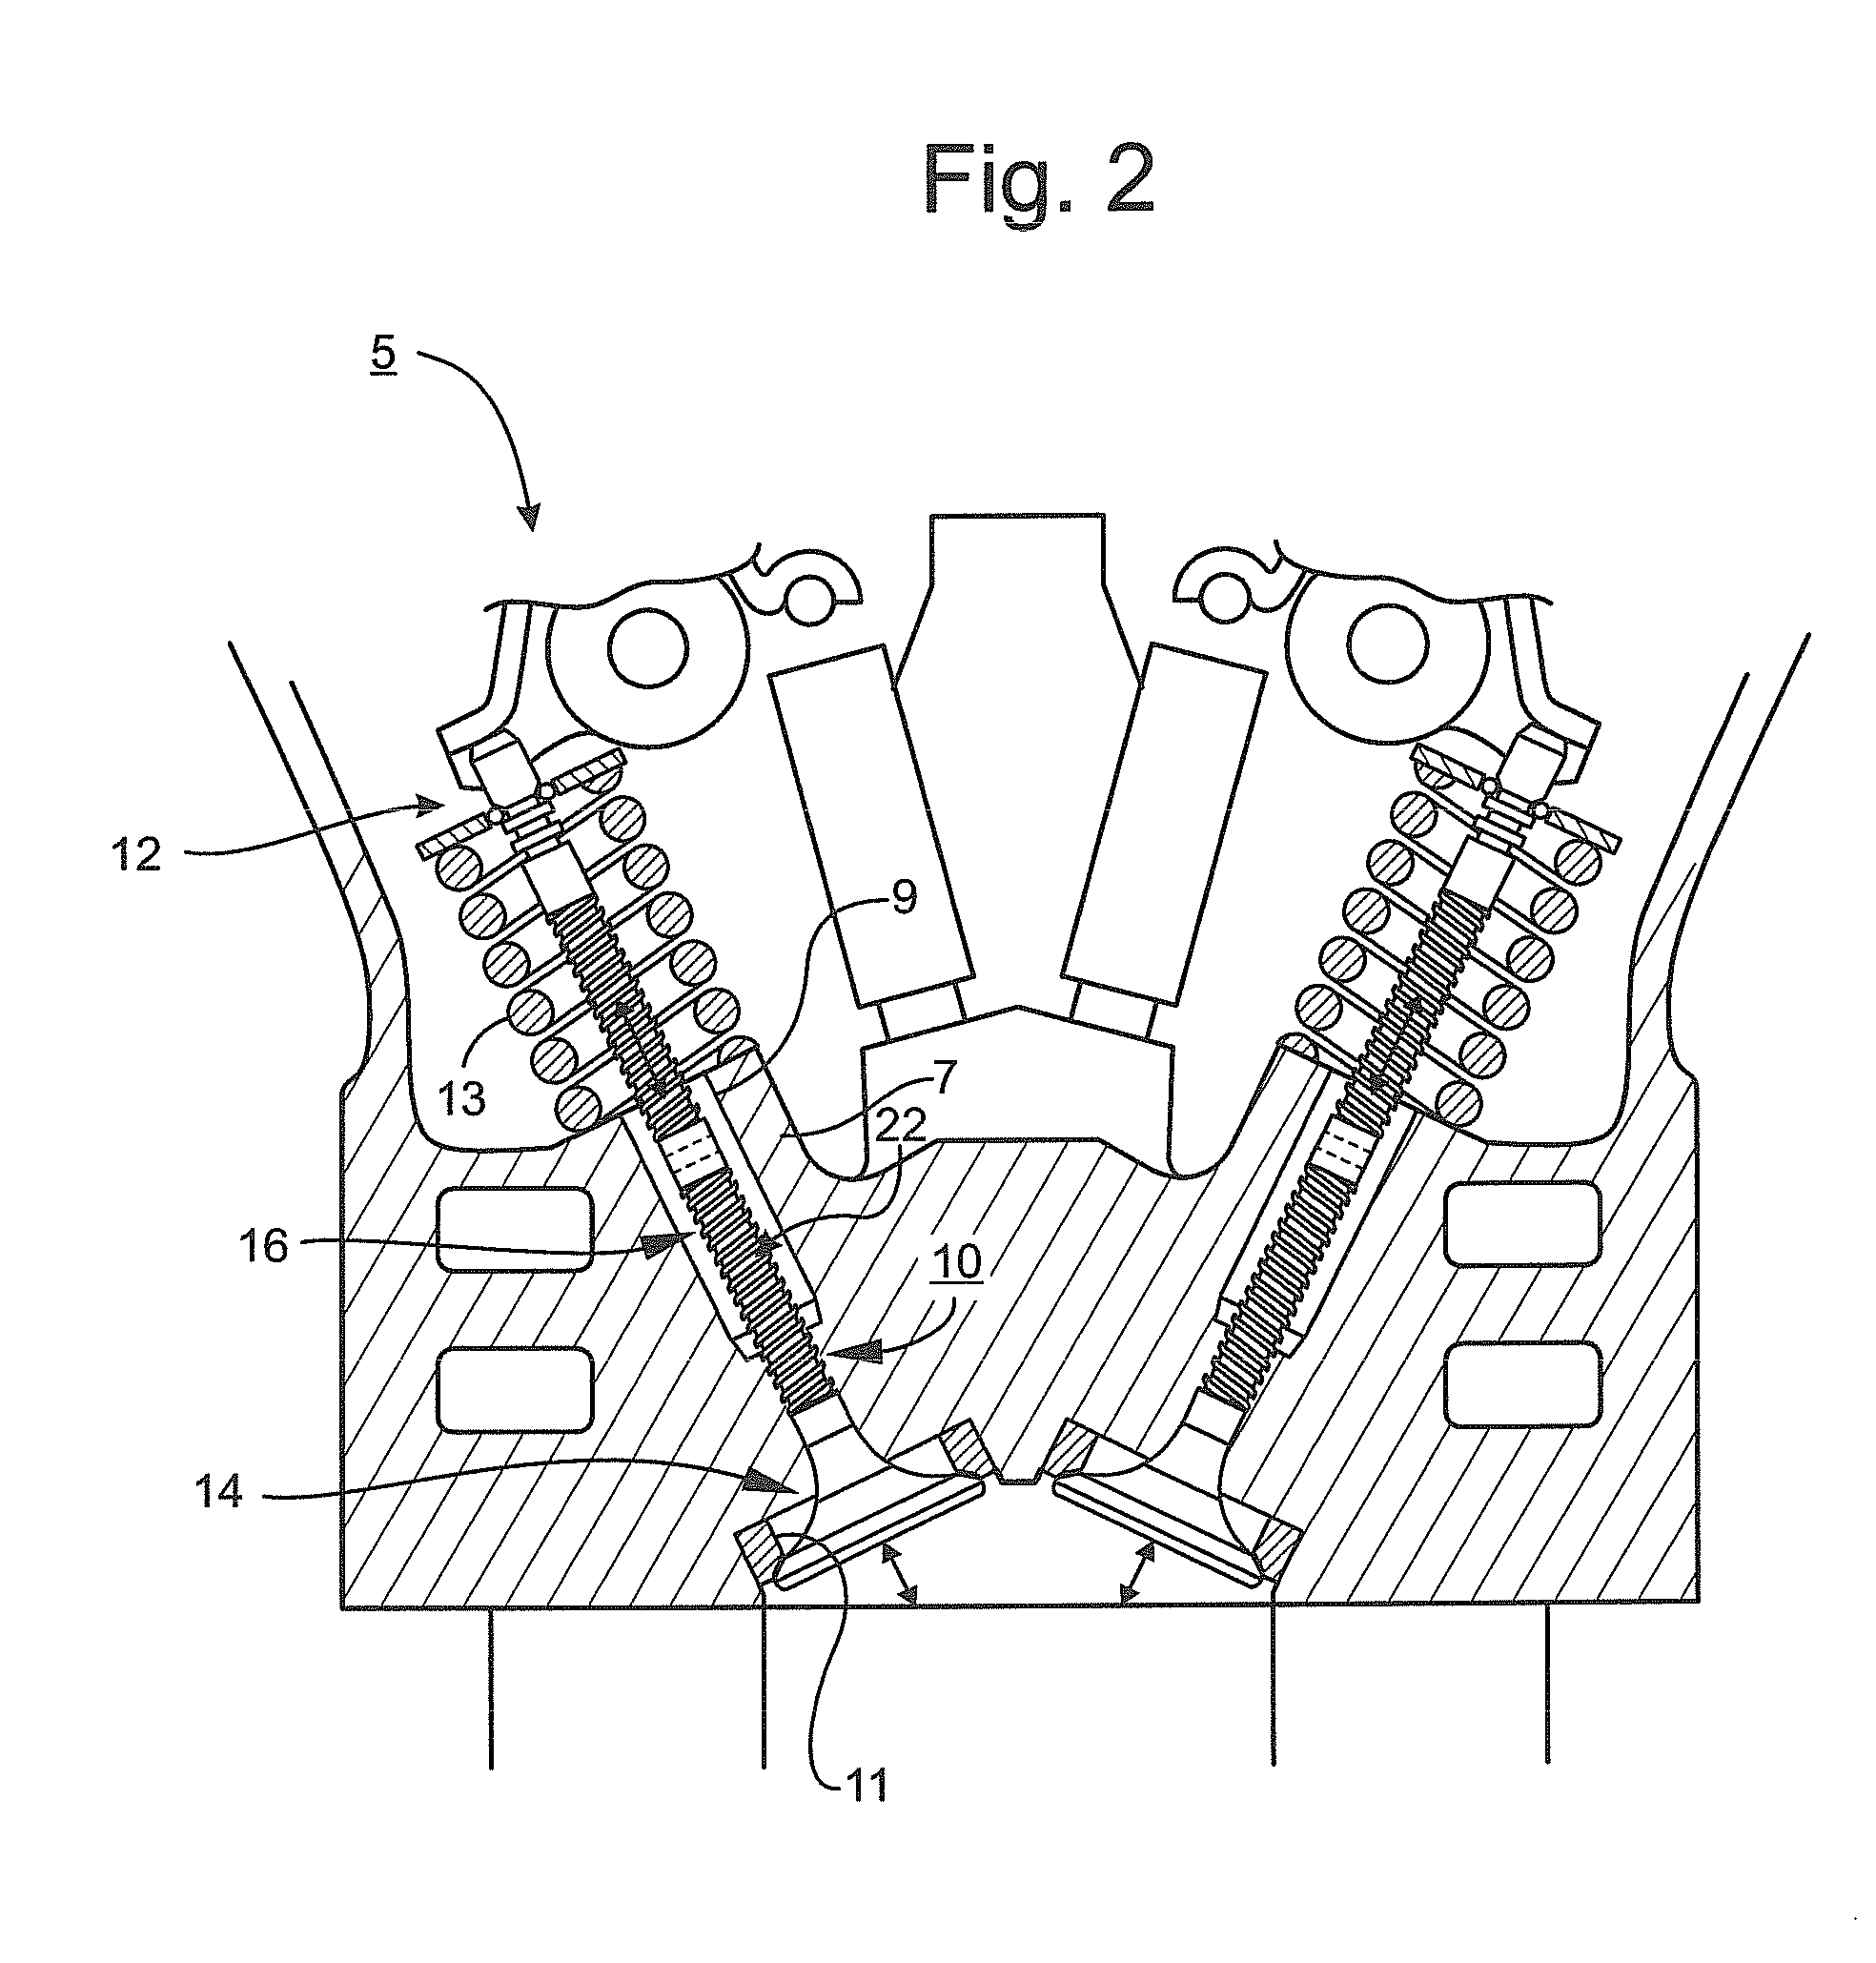 Engine valve for improved operating efficiency